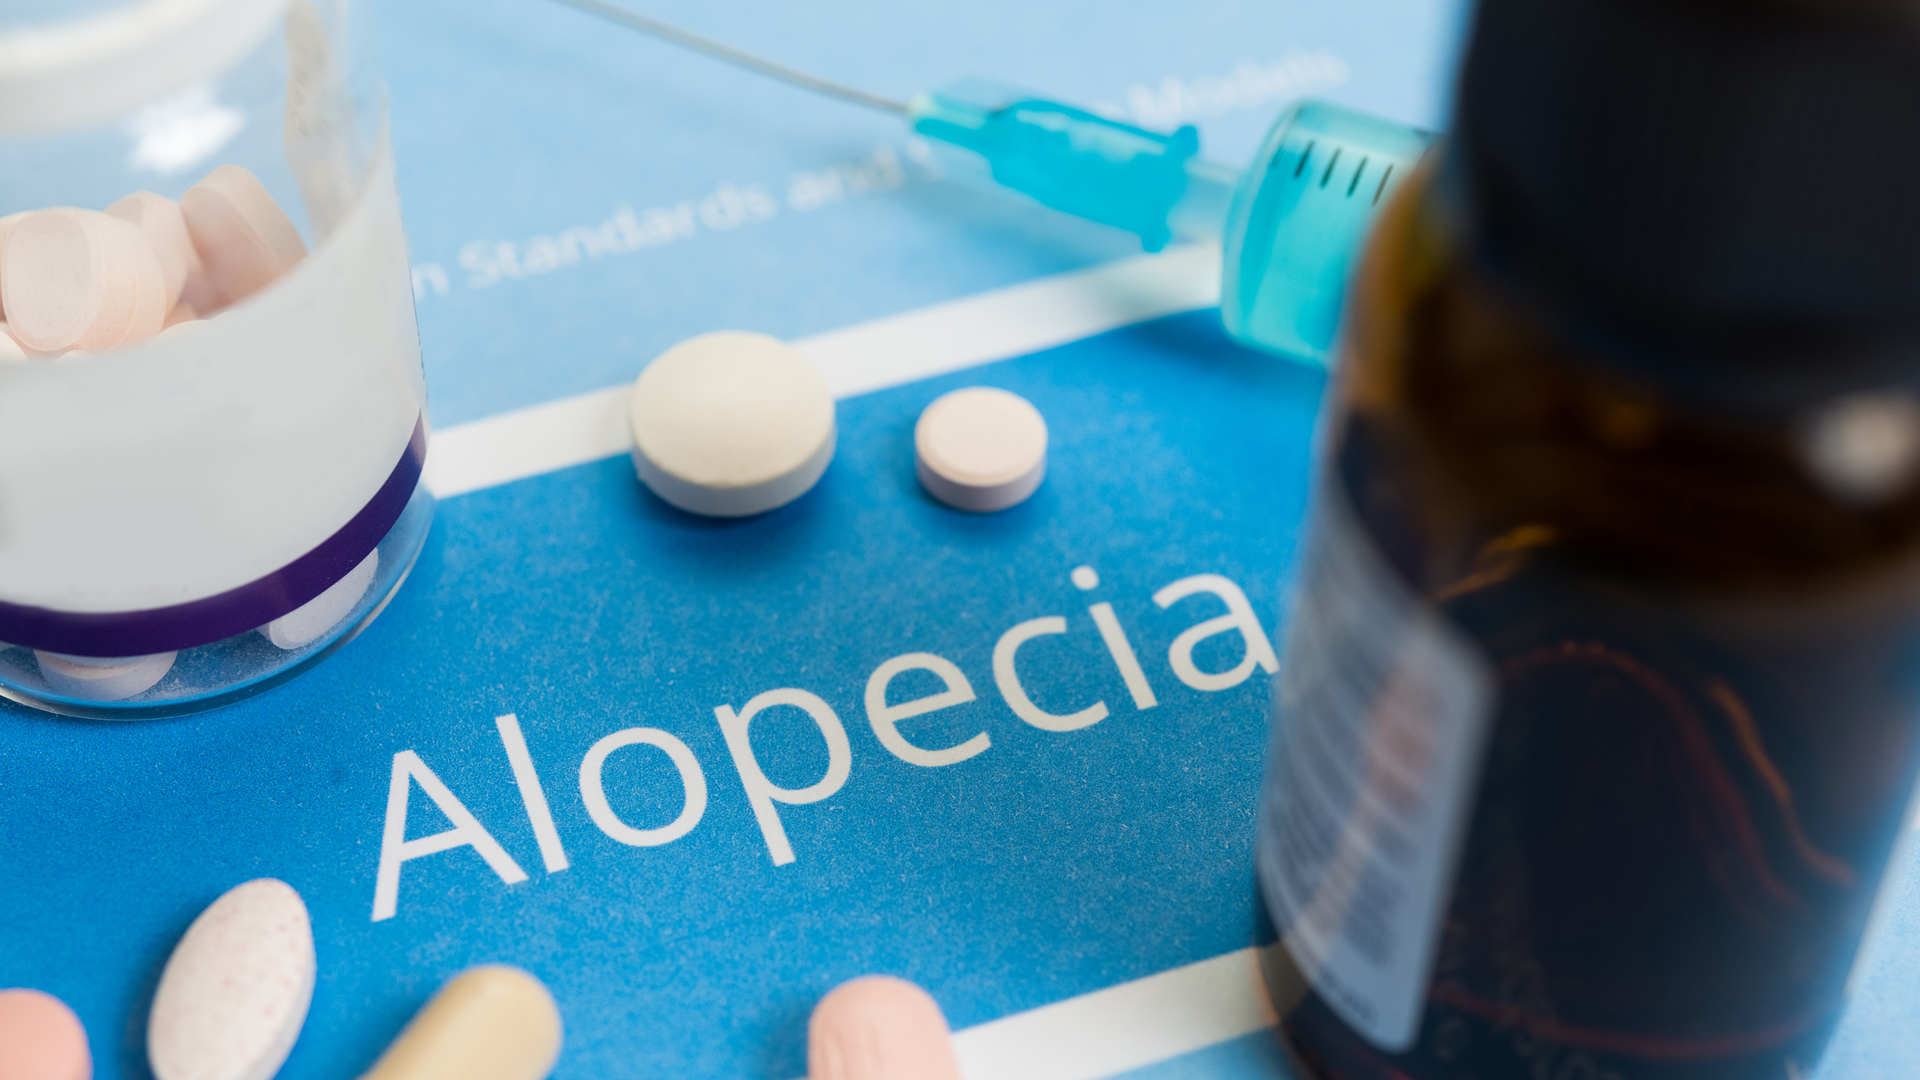 Medications and even surgeries are options to combat alopecia (Getty)